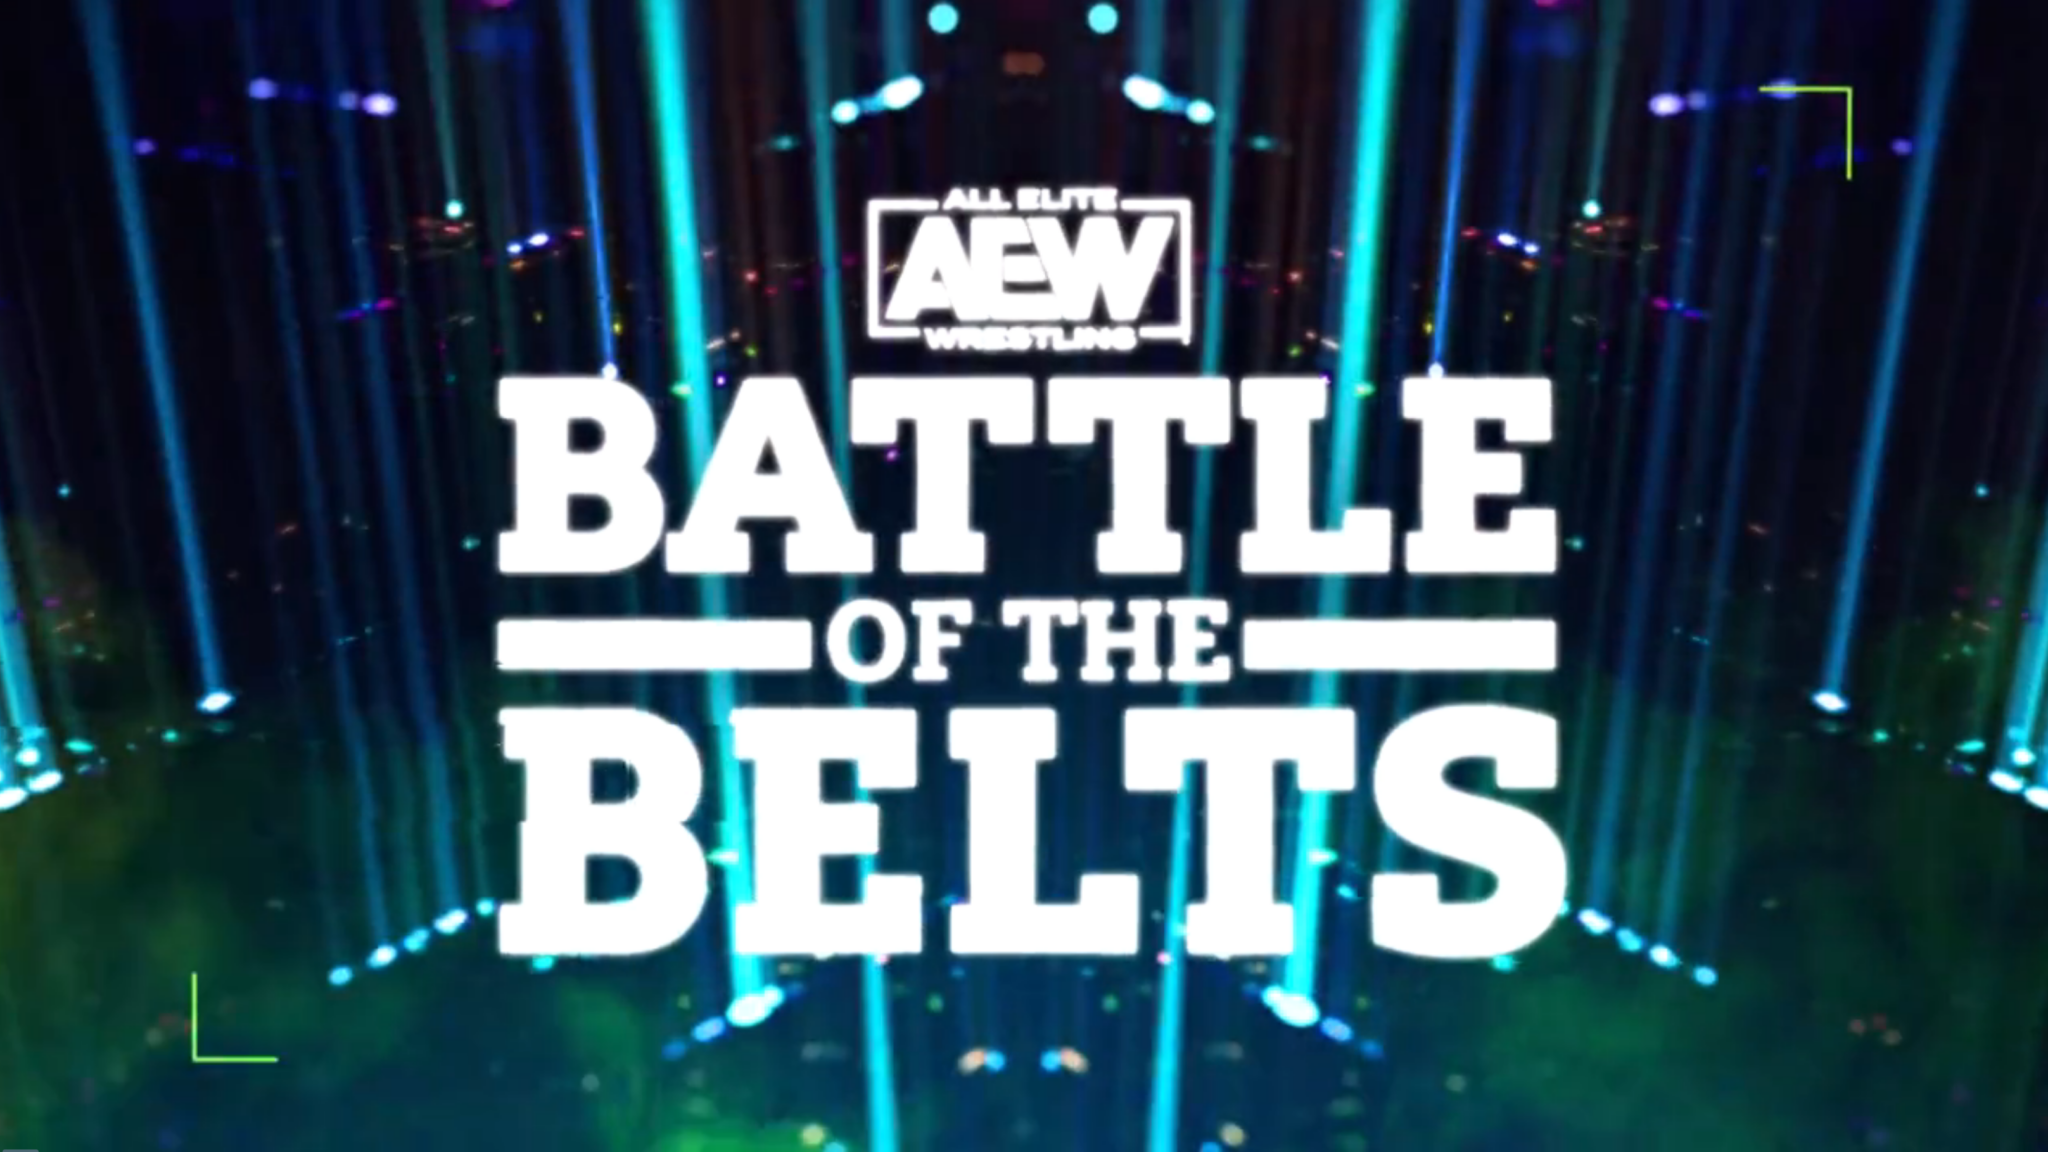 Two More Title Matches Made Official For AEW's Battle Of The Belts IV